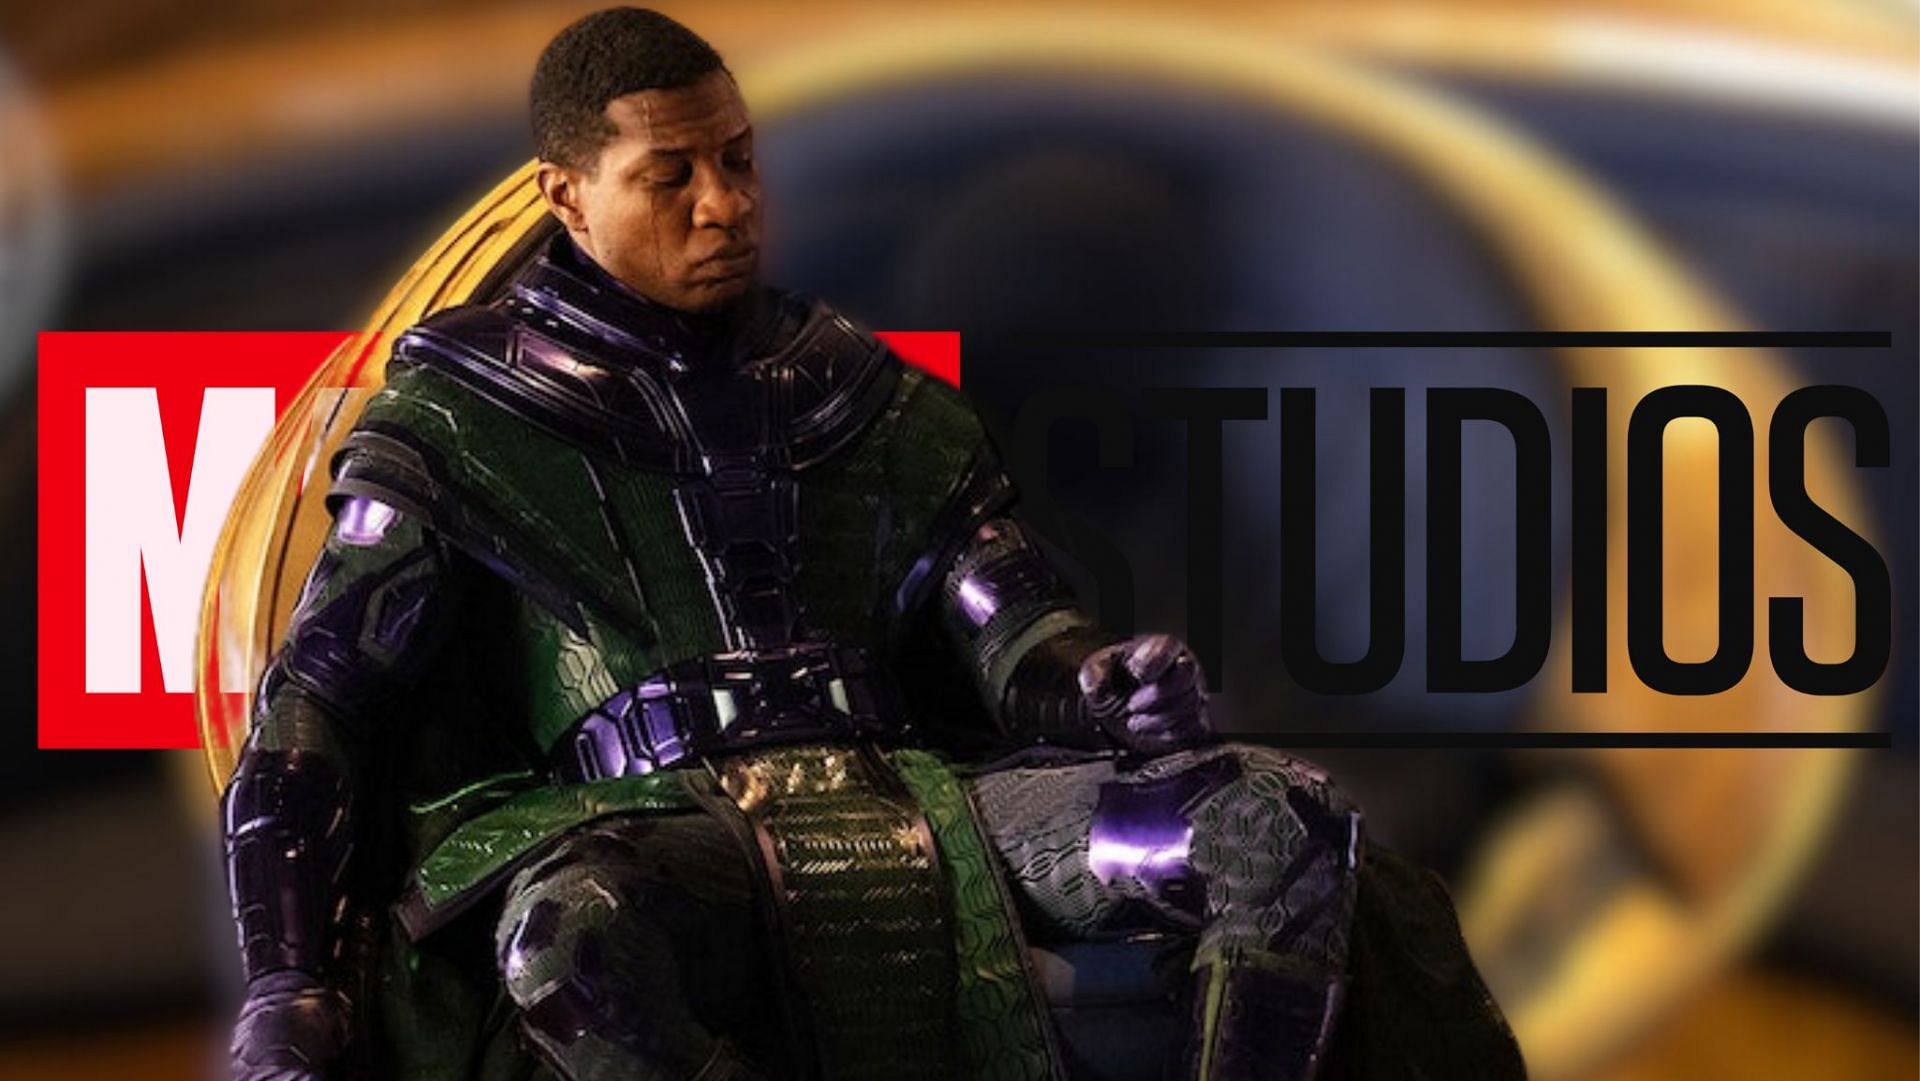 Jonathan Majors as Kang the Conqueror featured in the new Ant-Man and The Wasp: Quantumania trailer amidst legal troubles (Image via Sportskeeda)